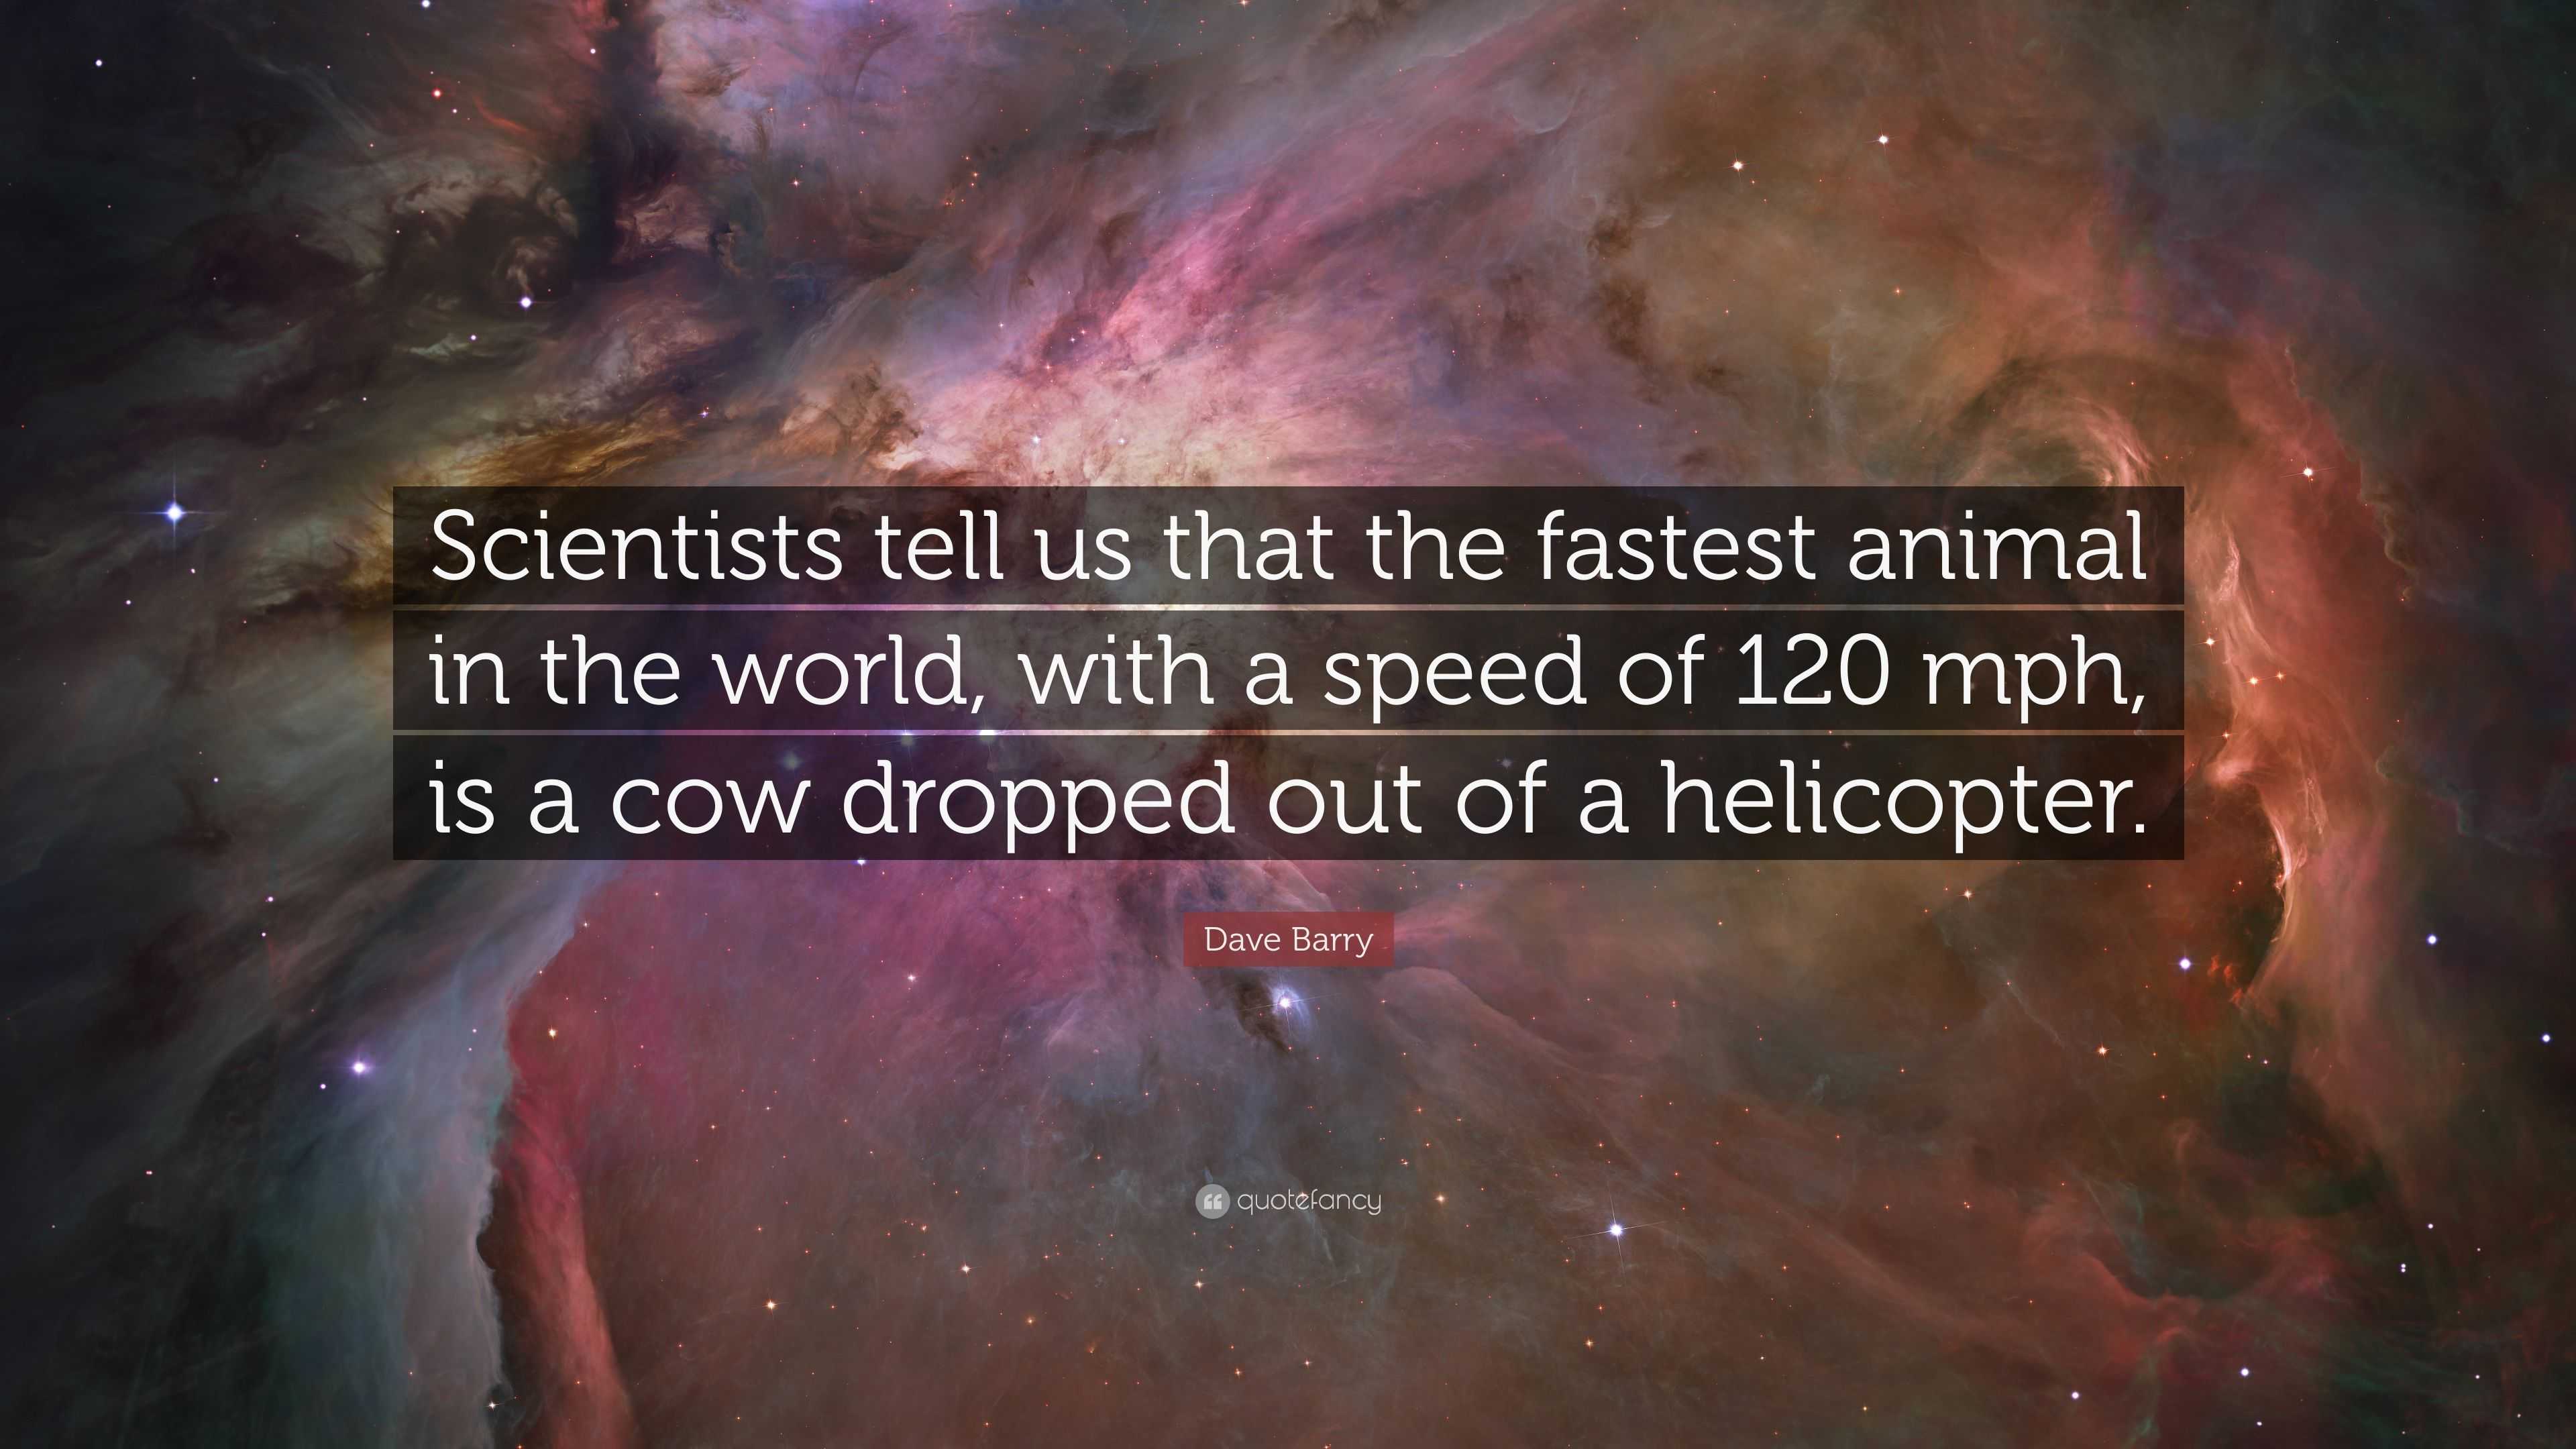 Dave Barry Quote: “Scientists tell us that the fastest animal in the world,  with a speed